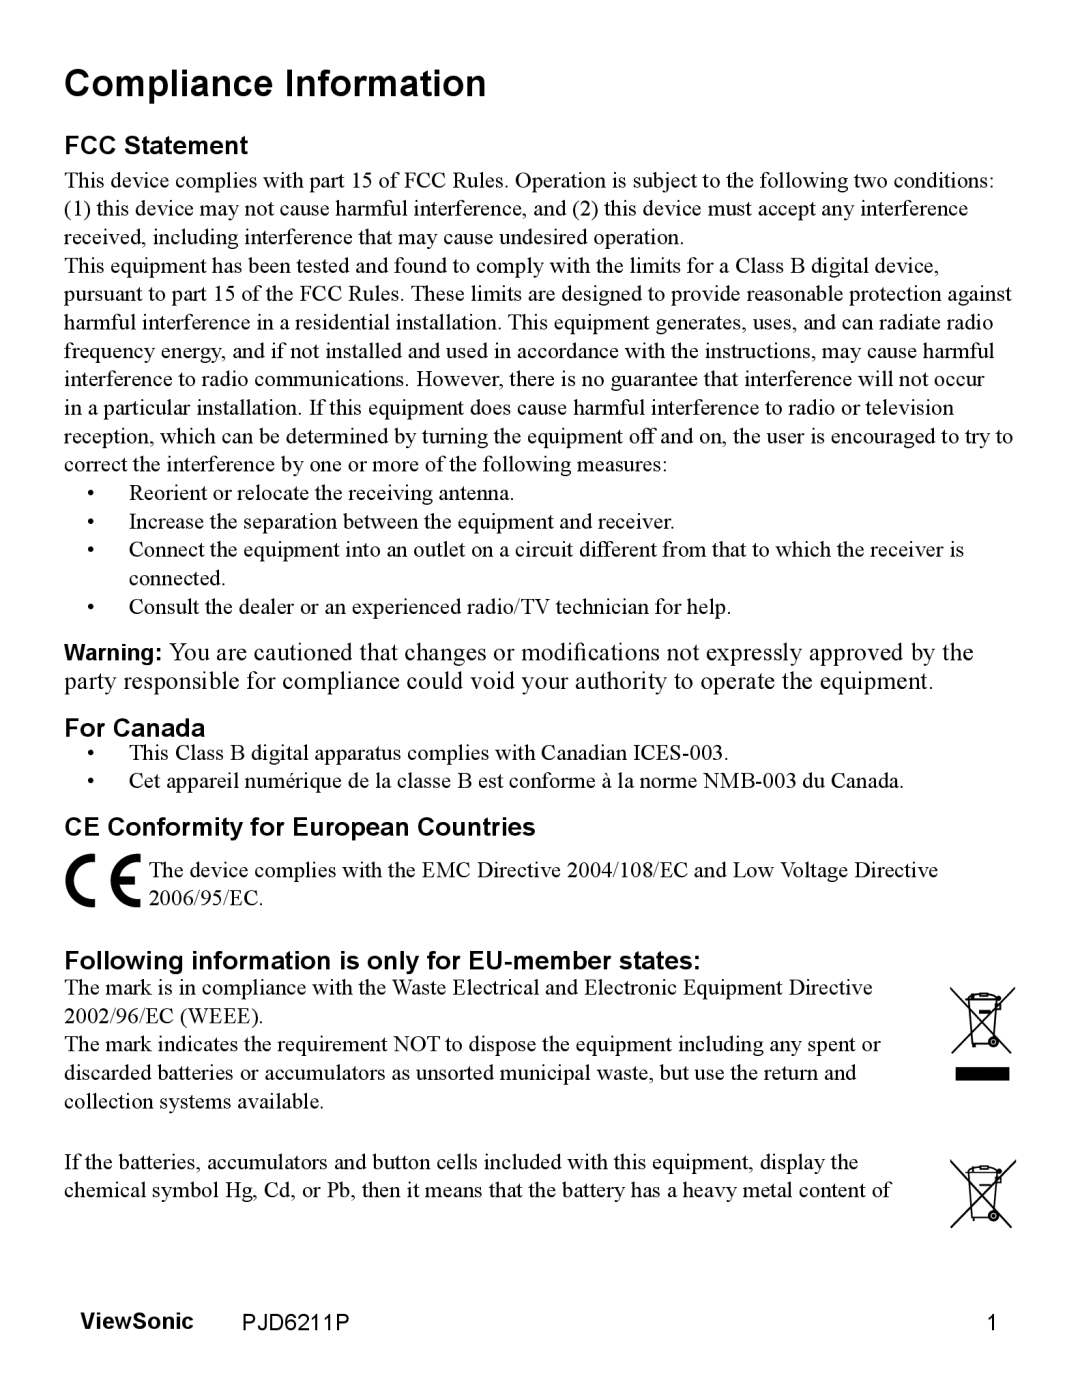 ViewSonic VS13729 Compliance Information, FCC Statement, For Canada, CE Conformity for European Countries, ViewSonic 